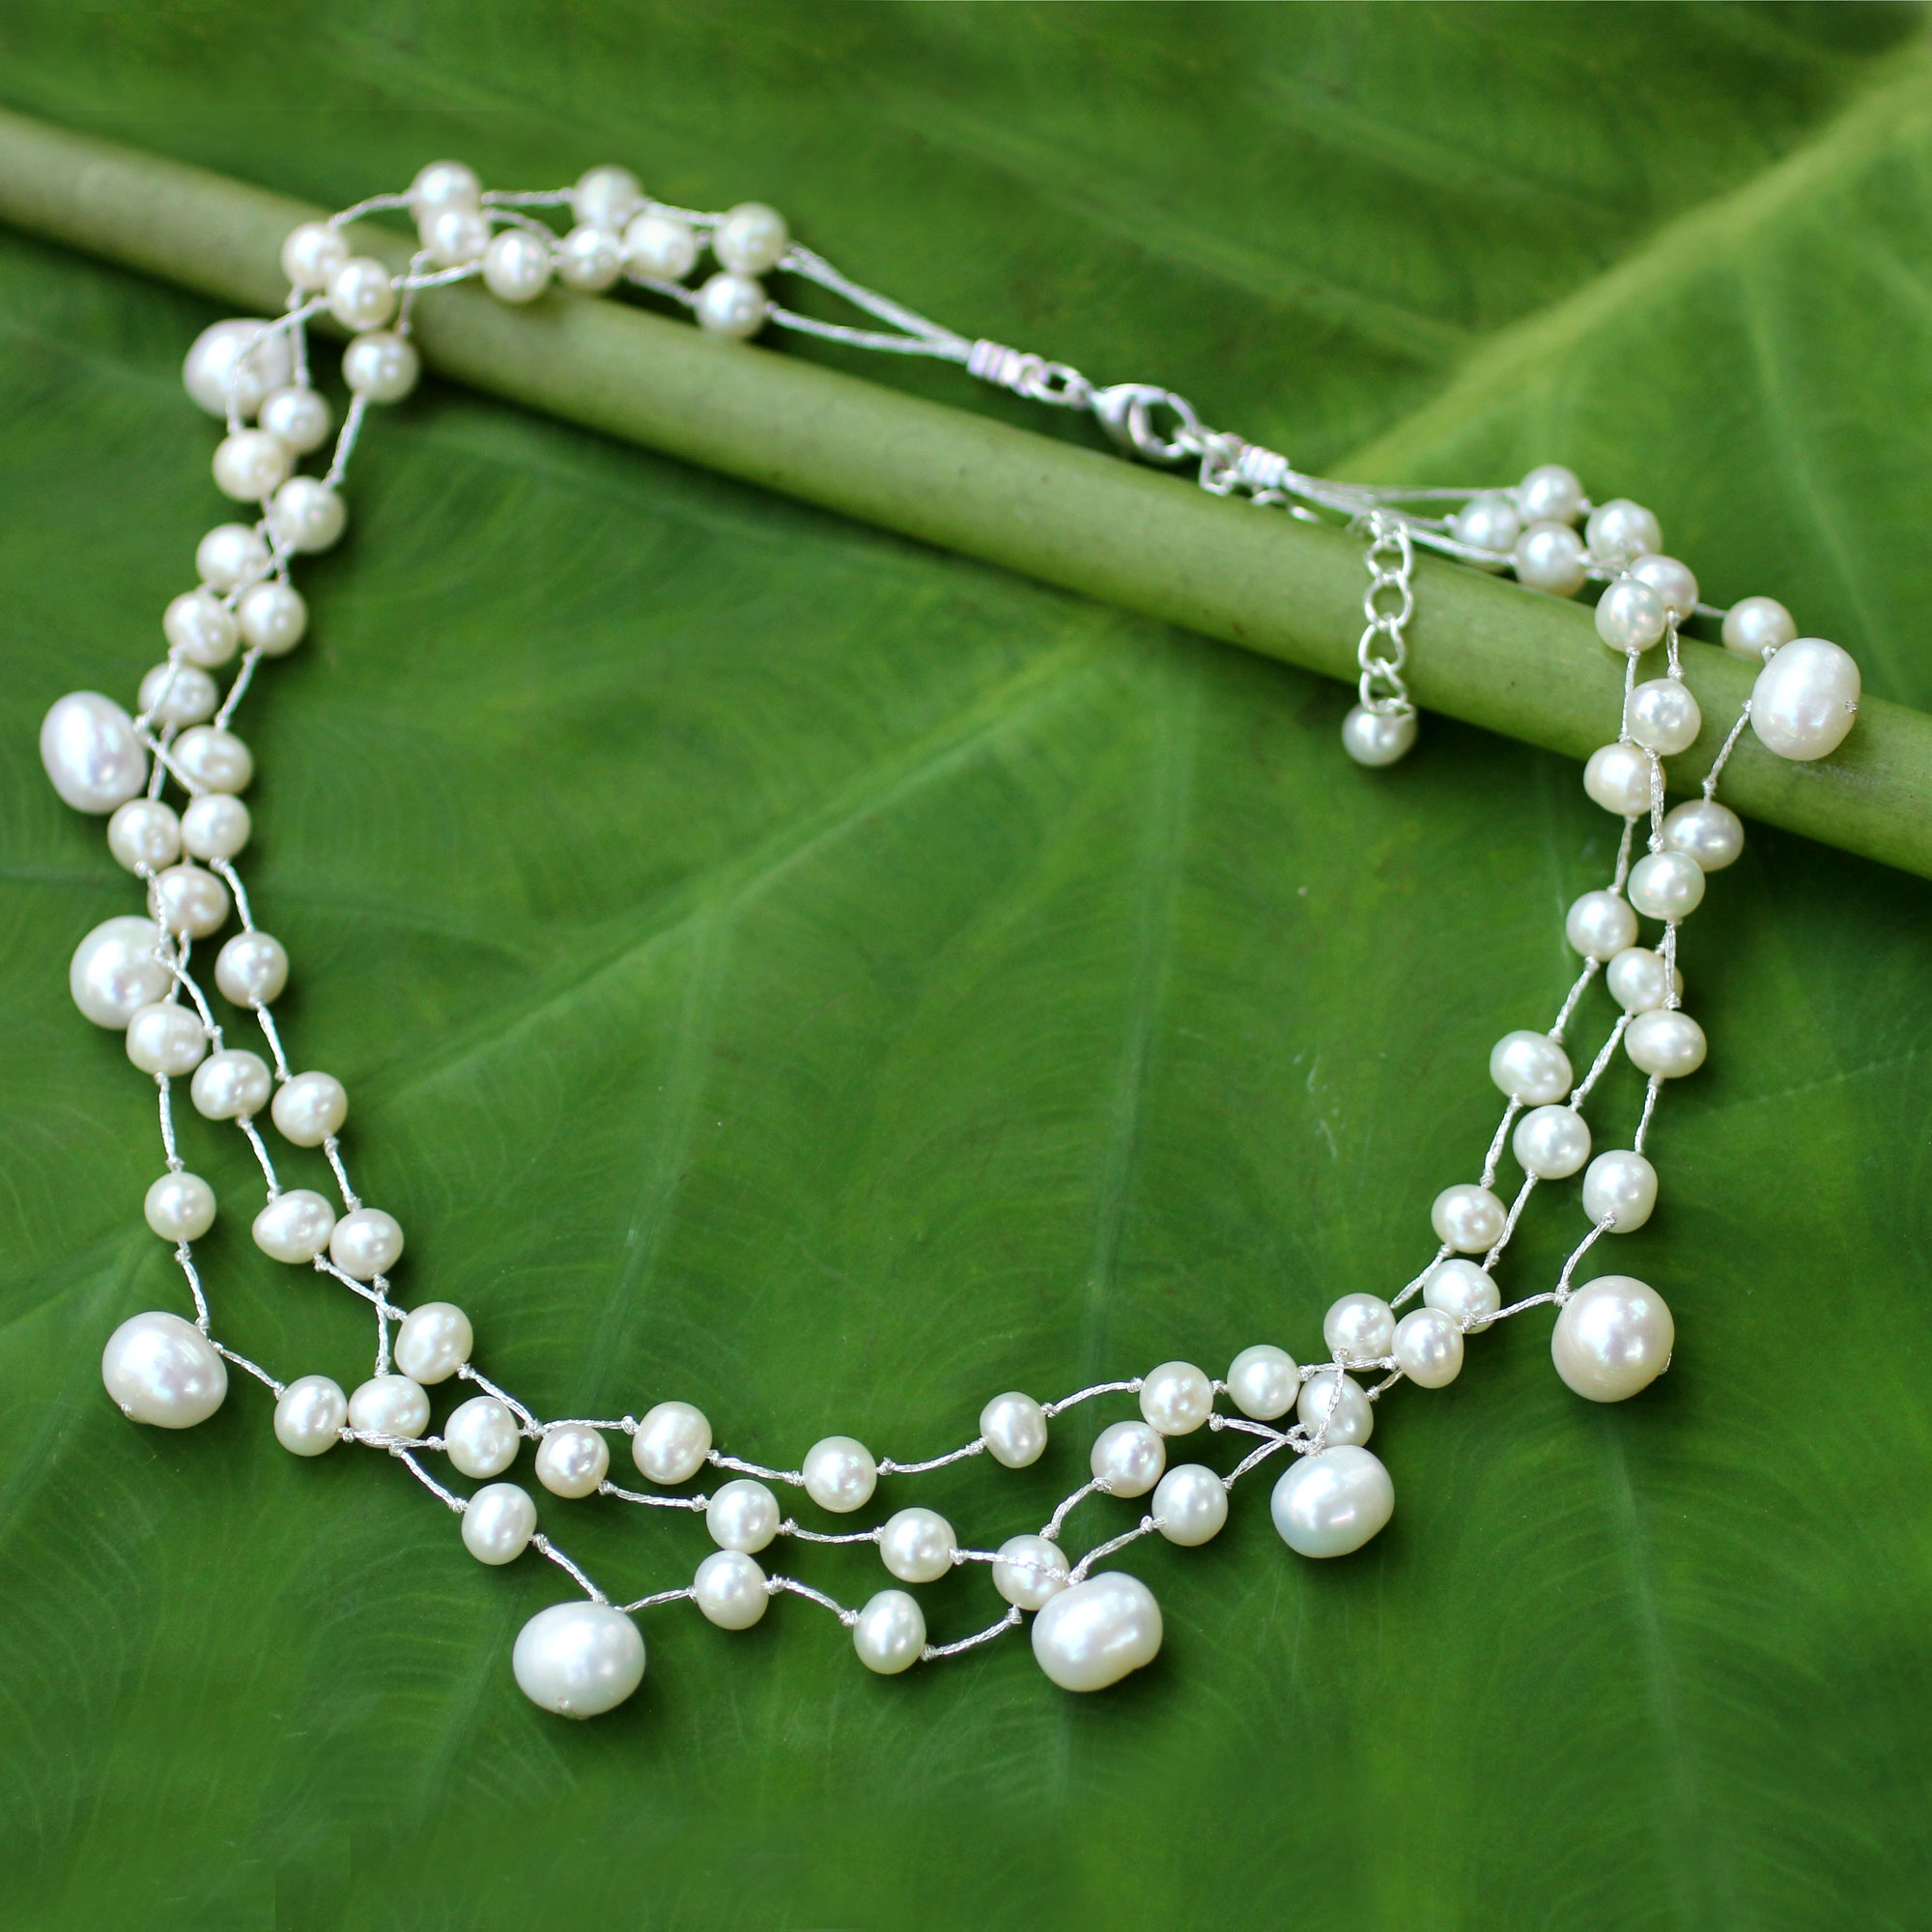 Artisan Crafted Pearl Choker, 'Moonlight Glow' Gemstone to Complement Skin Tone 